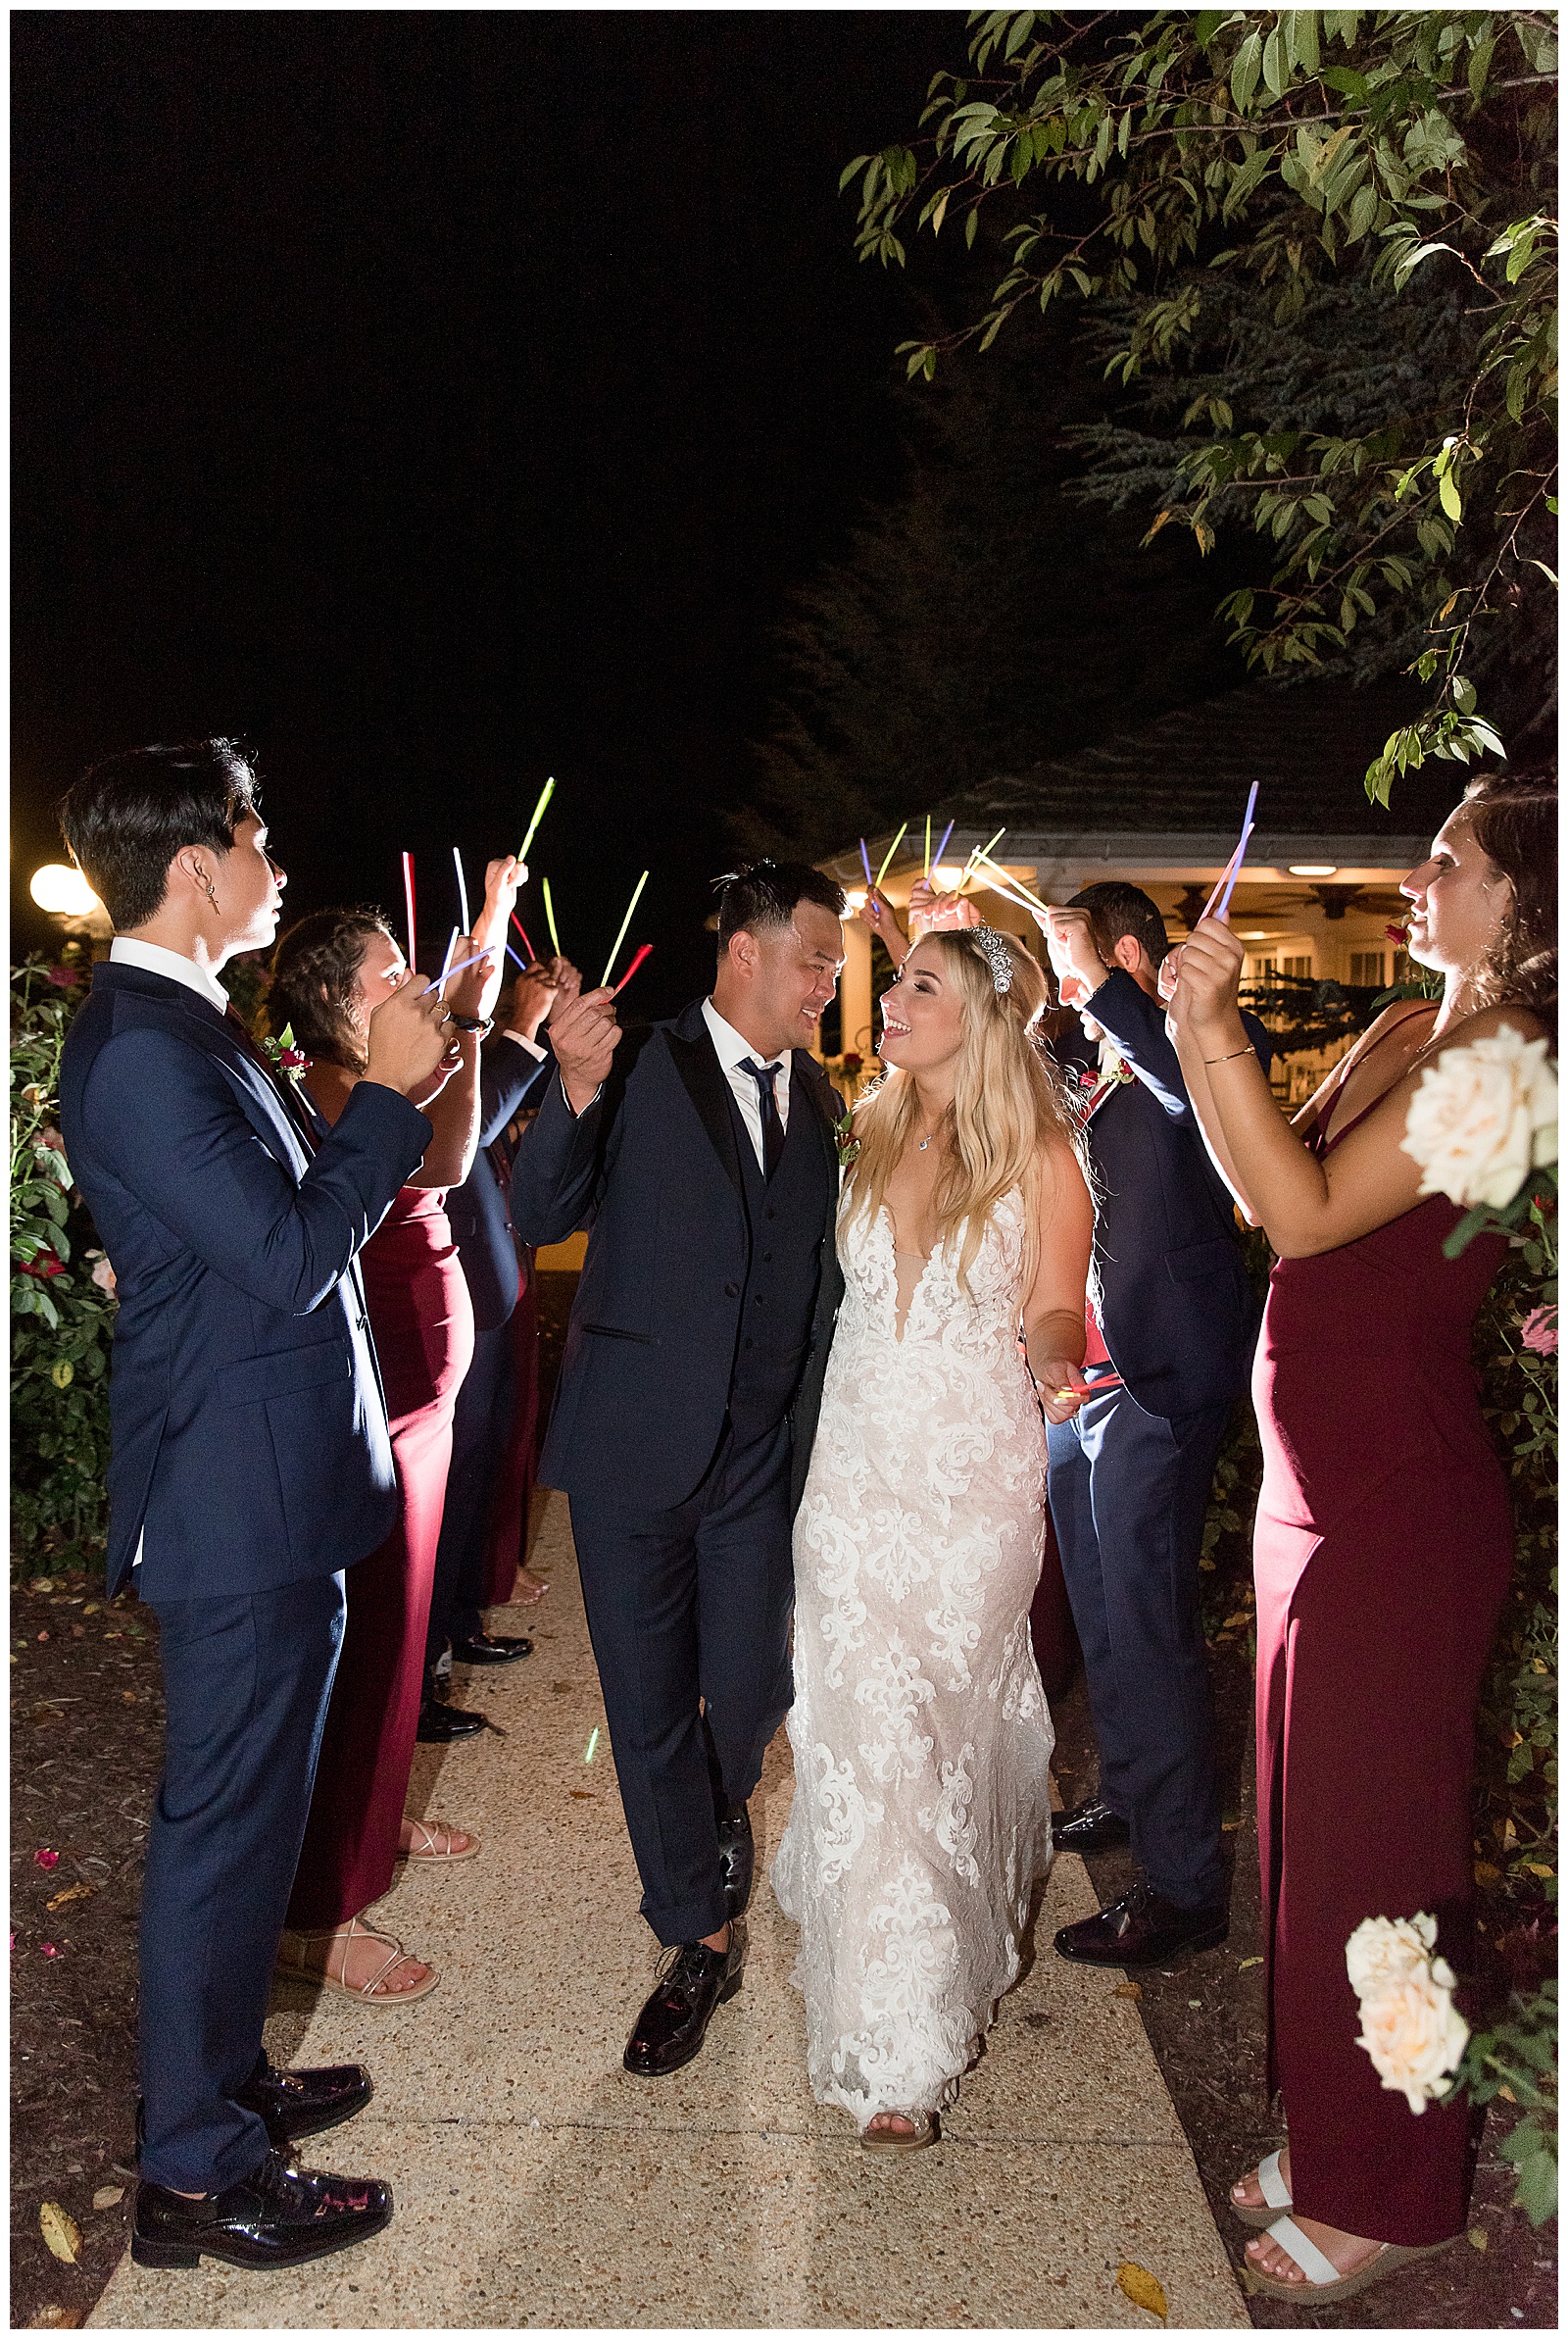 groom and bride walking towards camera and looking at each other as they leave reception surrounded by guests holding sparklers at nighttime